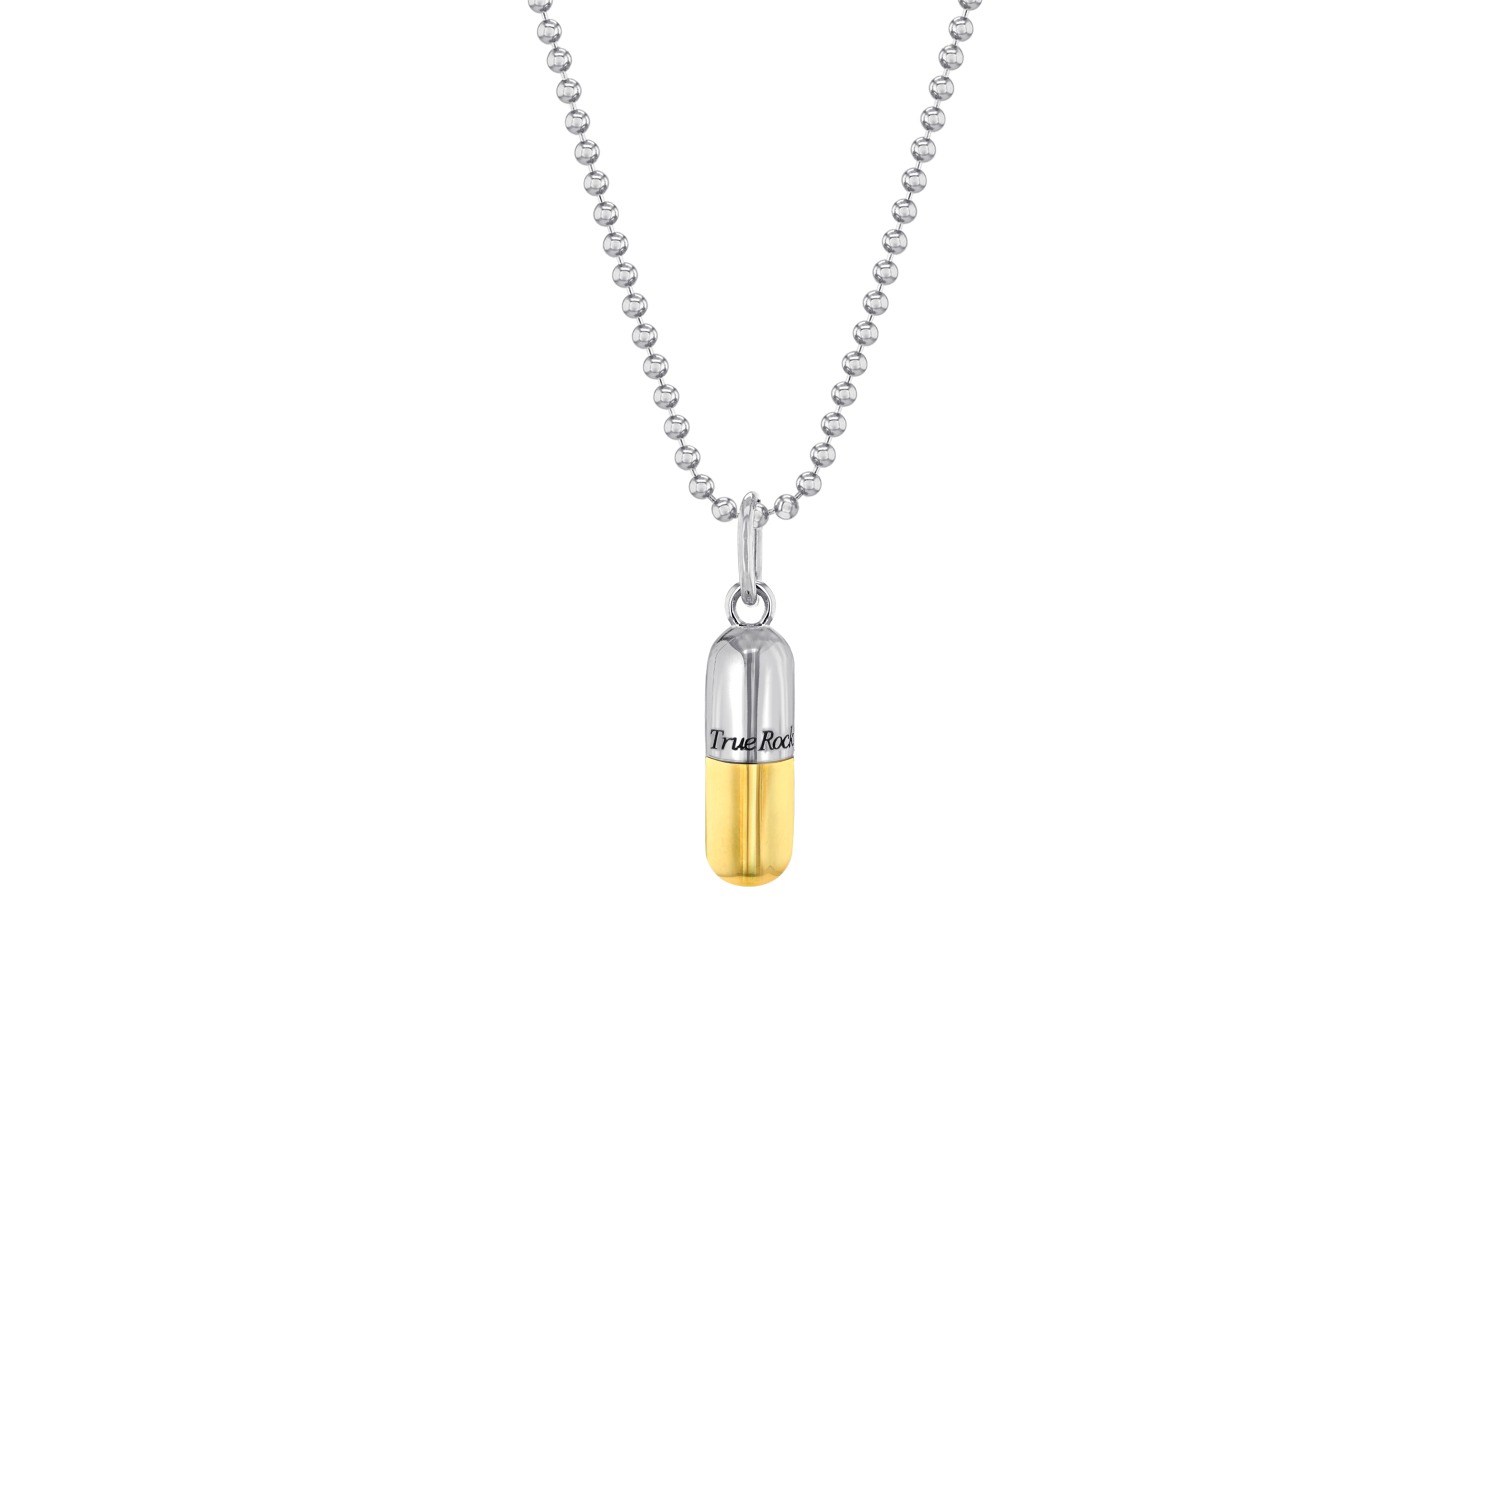 Men's Silver / Gold Small Pill Pendant 2Tone Sterling Silver & 18Kt Gold-Plated On Silver Chain True Rocks